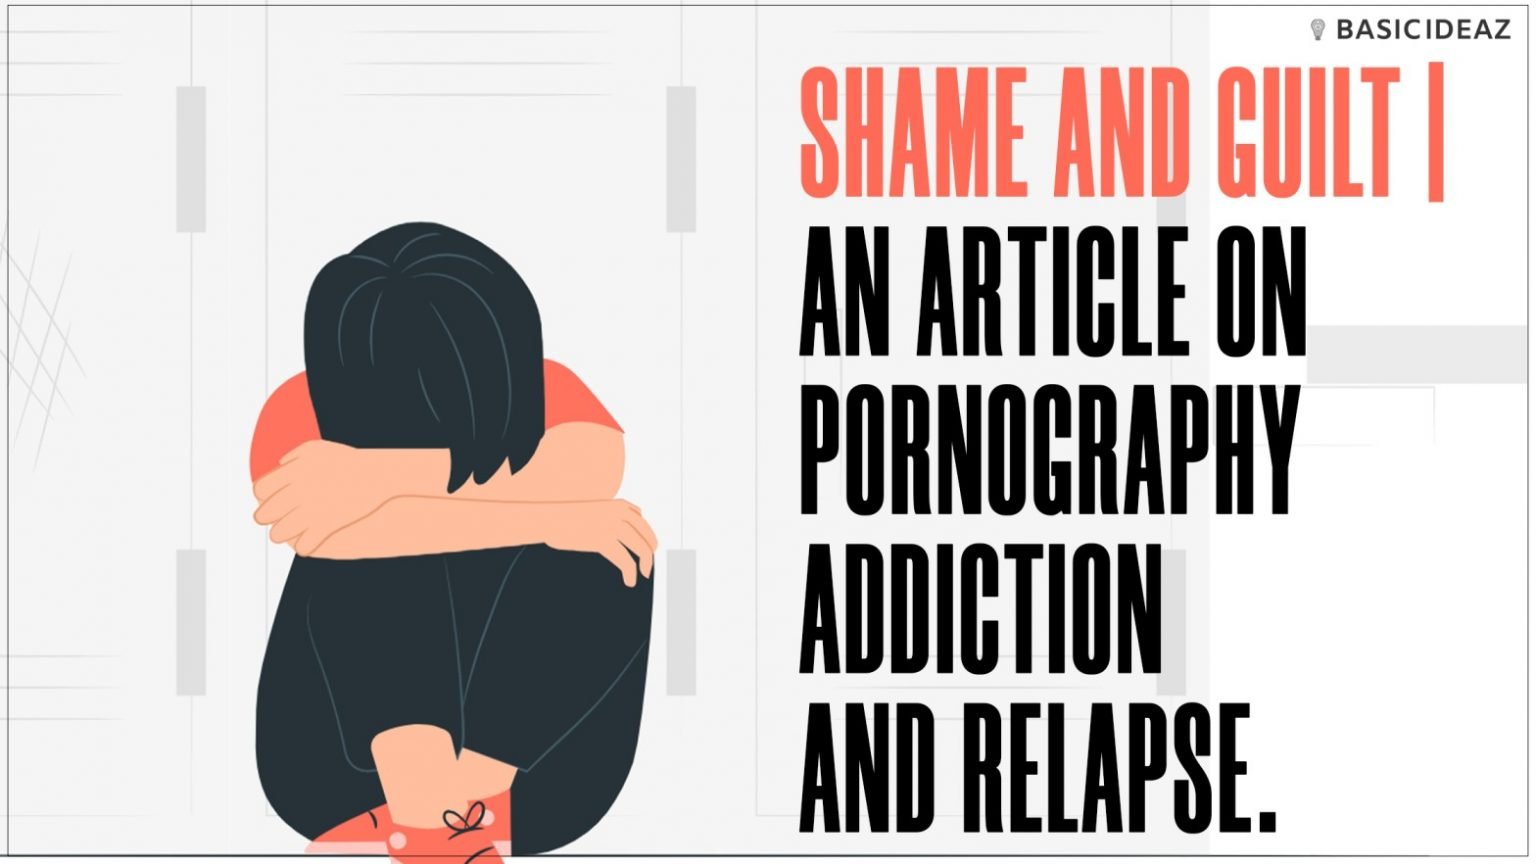 Pornography addiction and shame and guilt